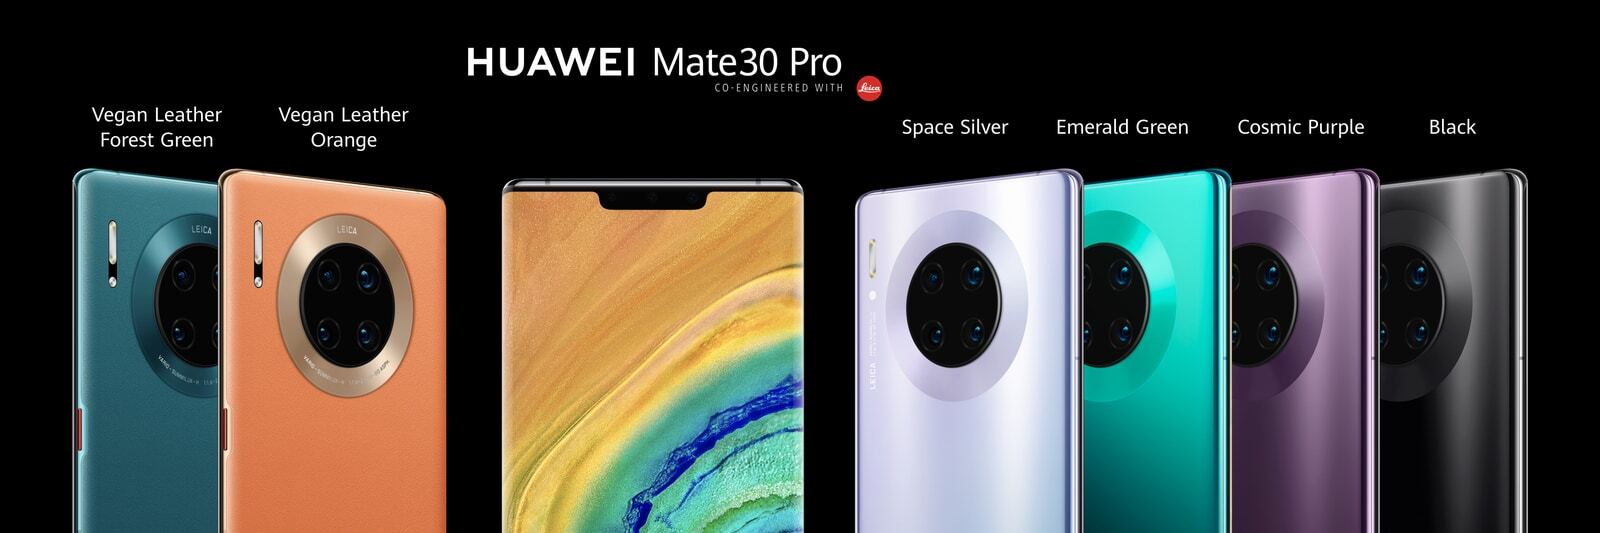 Huawei Mate 30 Pro is official: amazing cameras, 5G support, but no Google apps